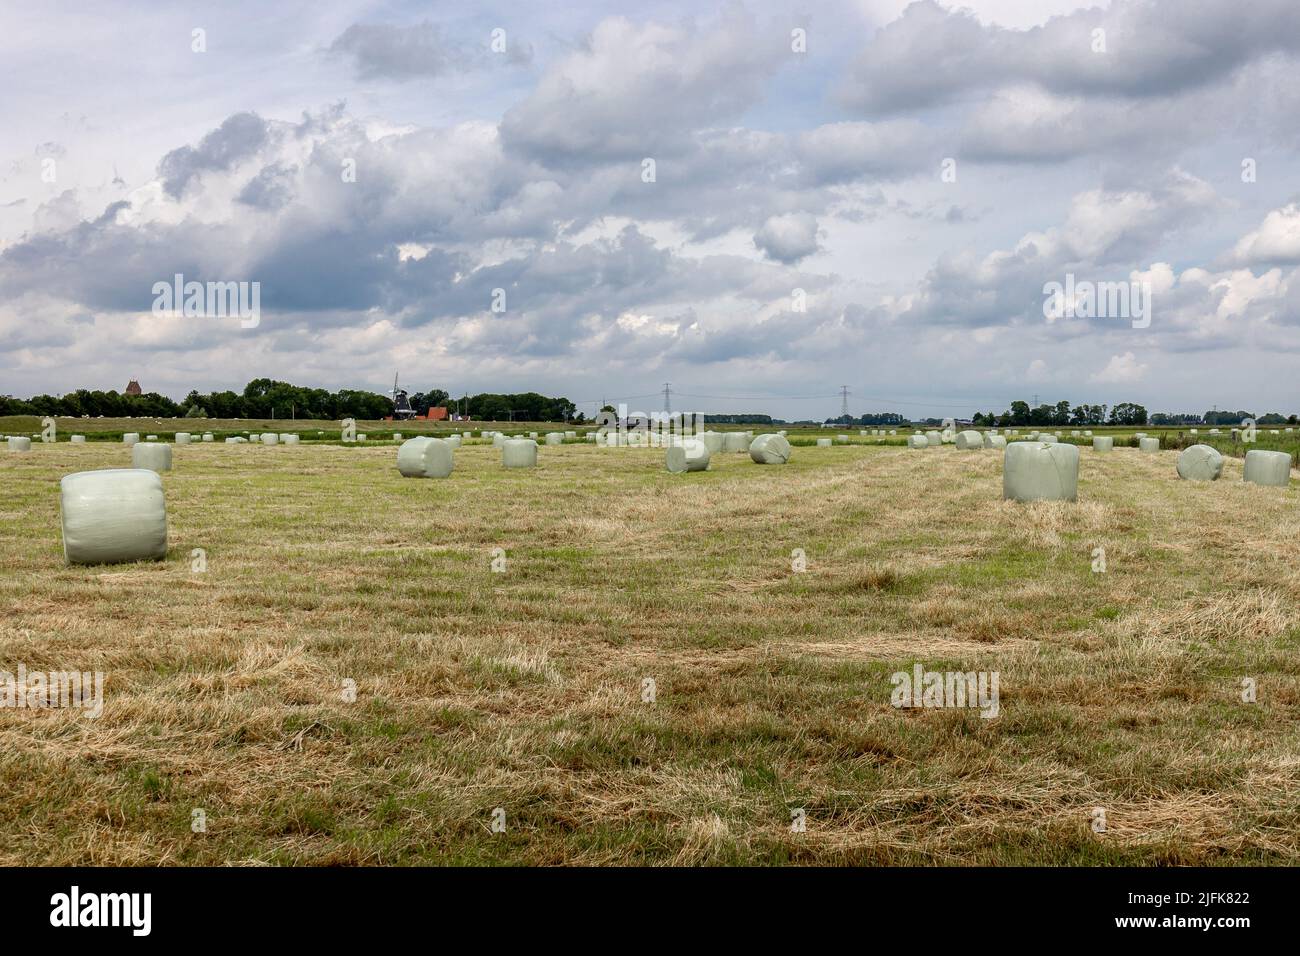 Farmers grassland with hay bales wrapped in plastic to serve as feed for the cows in winter time Stock Photo